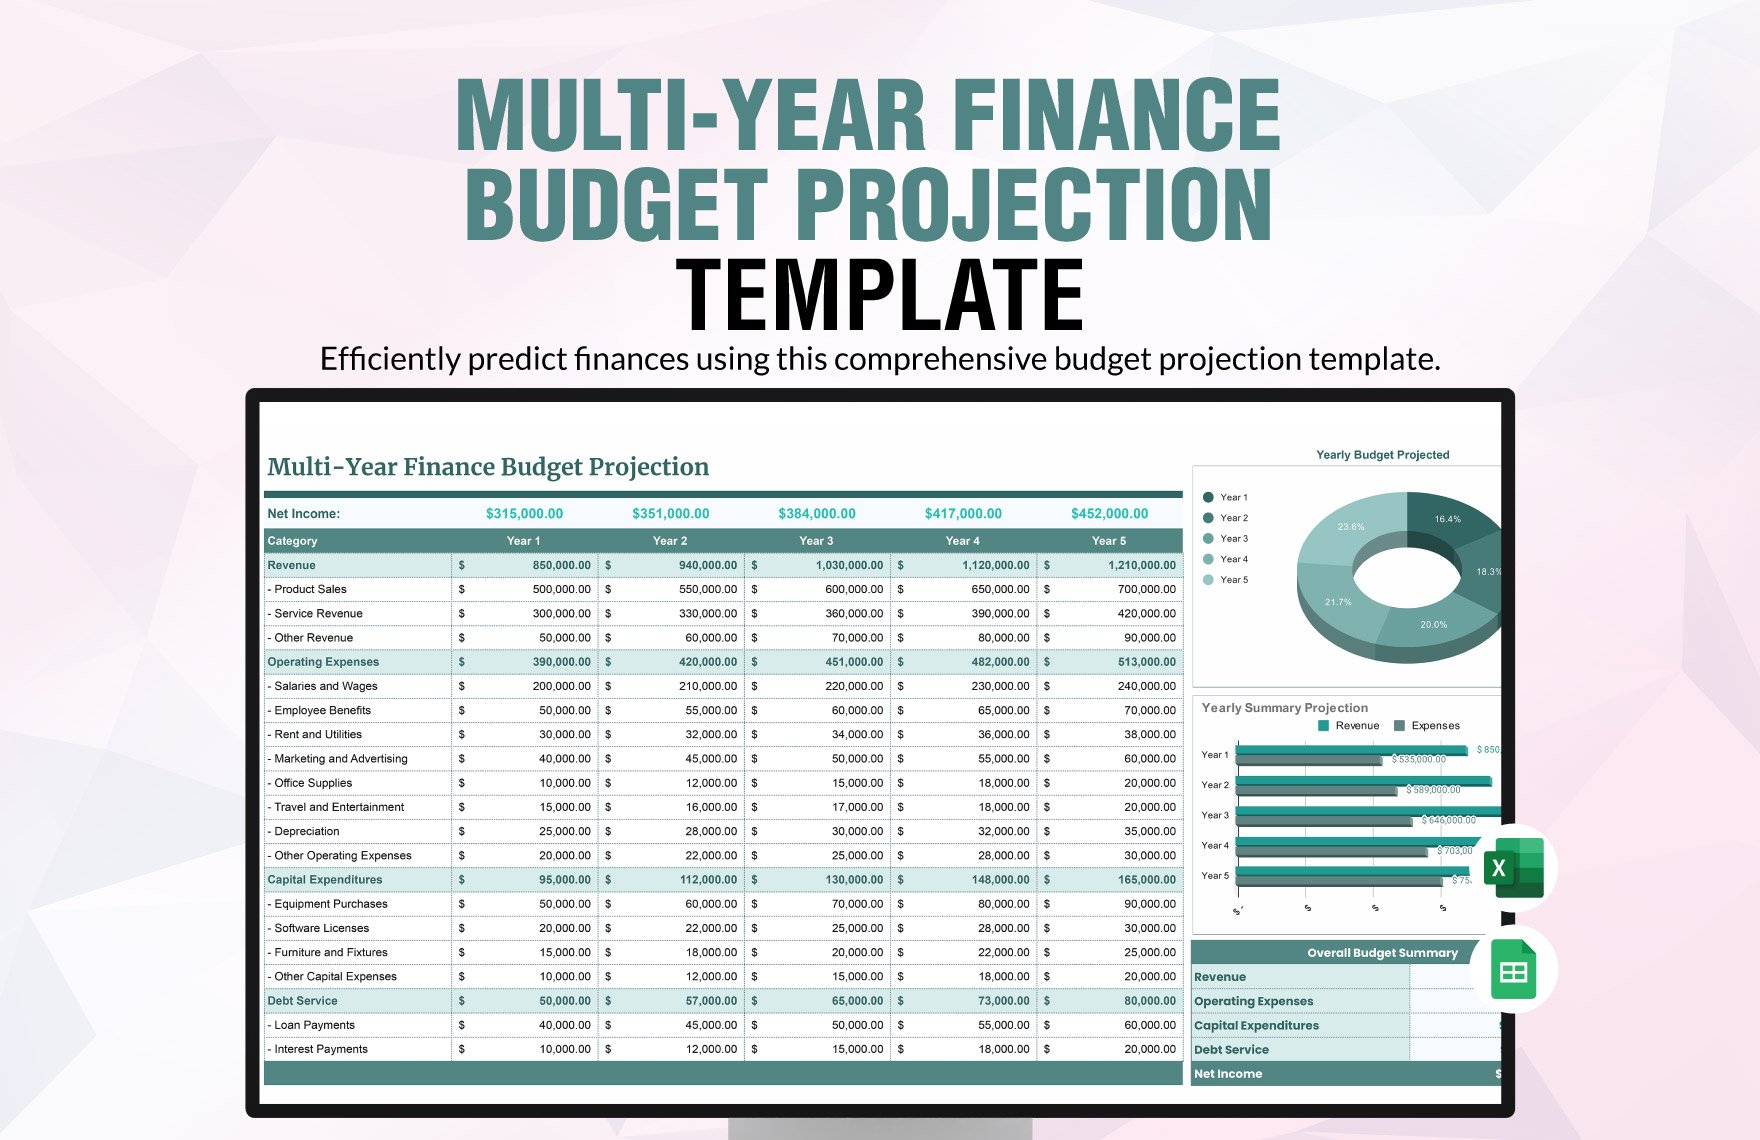 Multi-Year Finance Budget Projection Template in Excel, Google Sheets